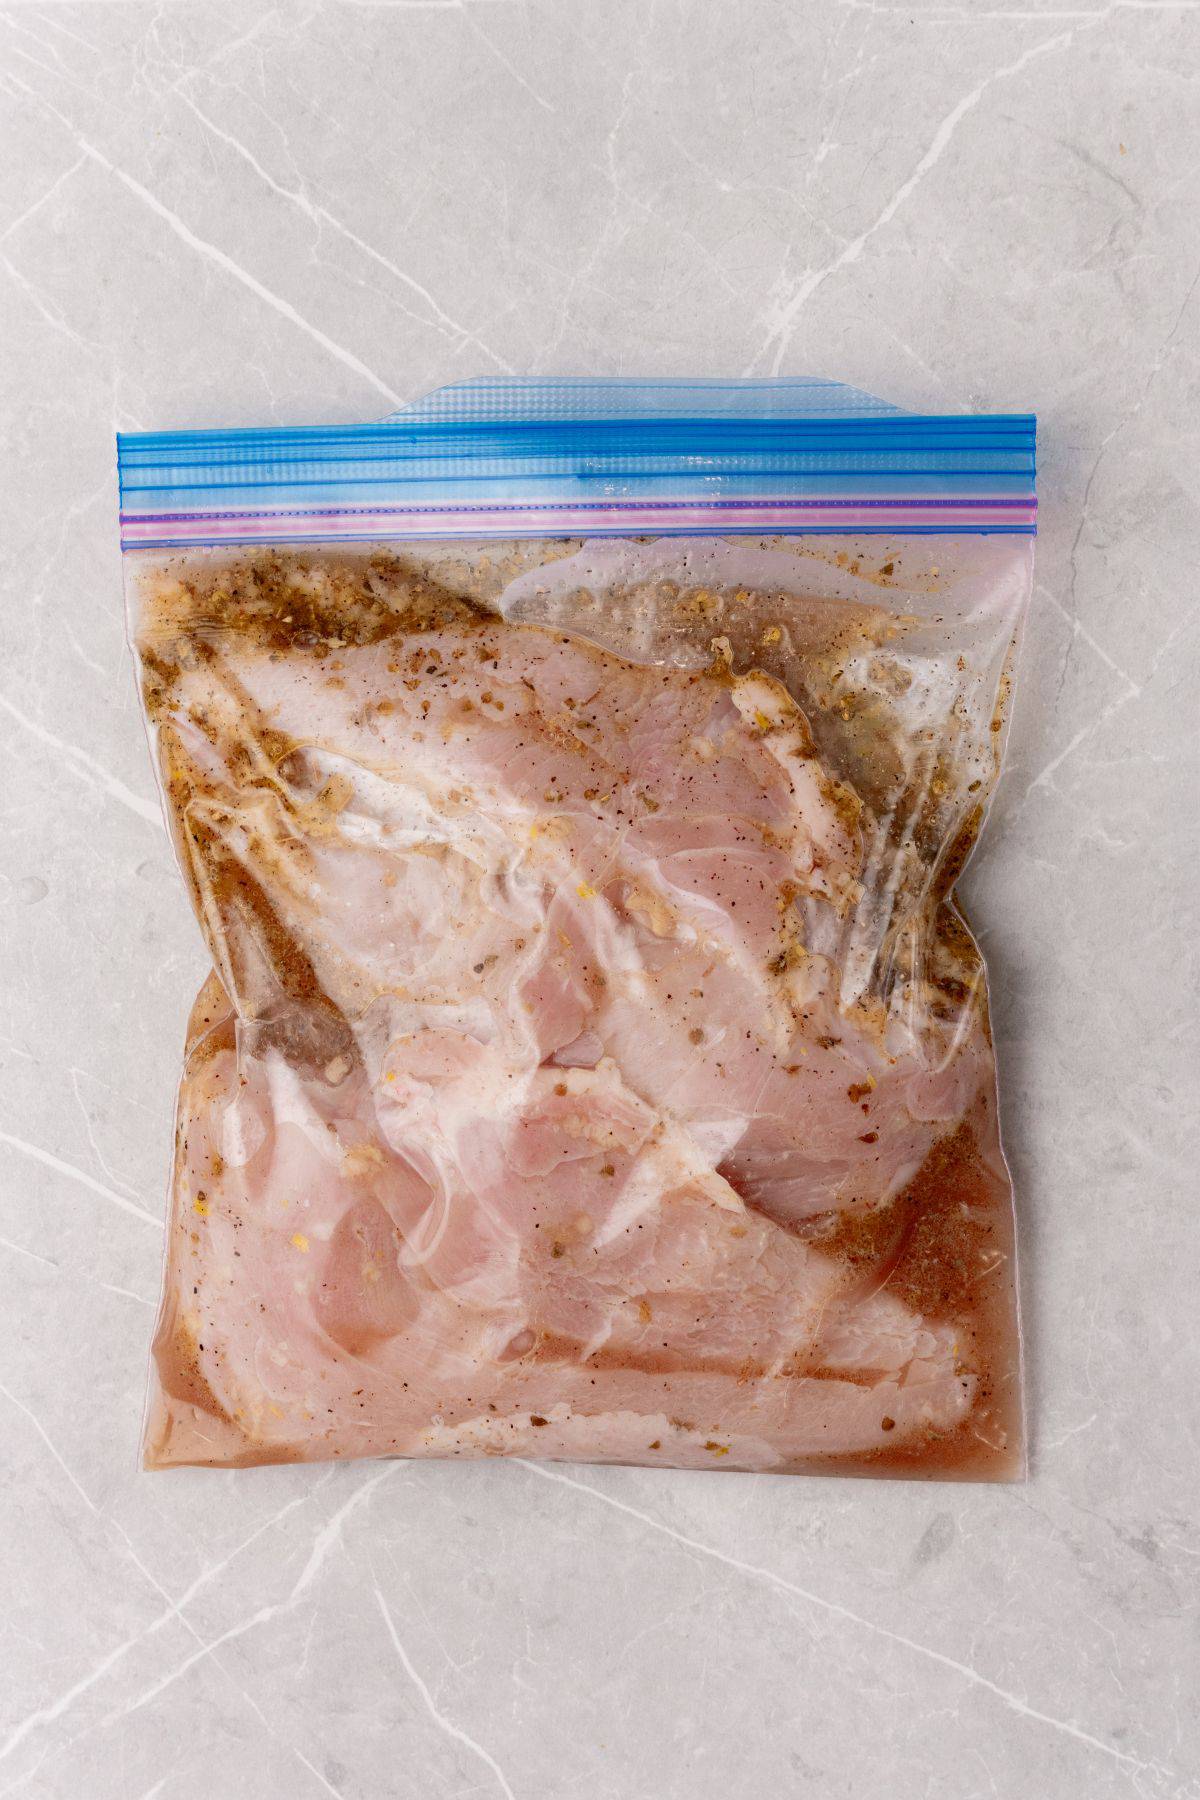 A plastic bag filled with in marinated chicken on a marble surface.